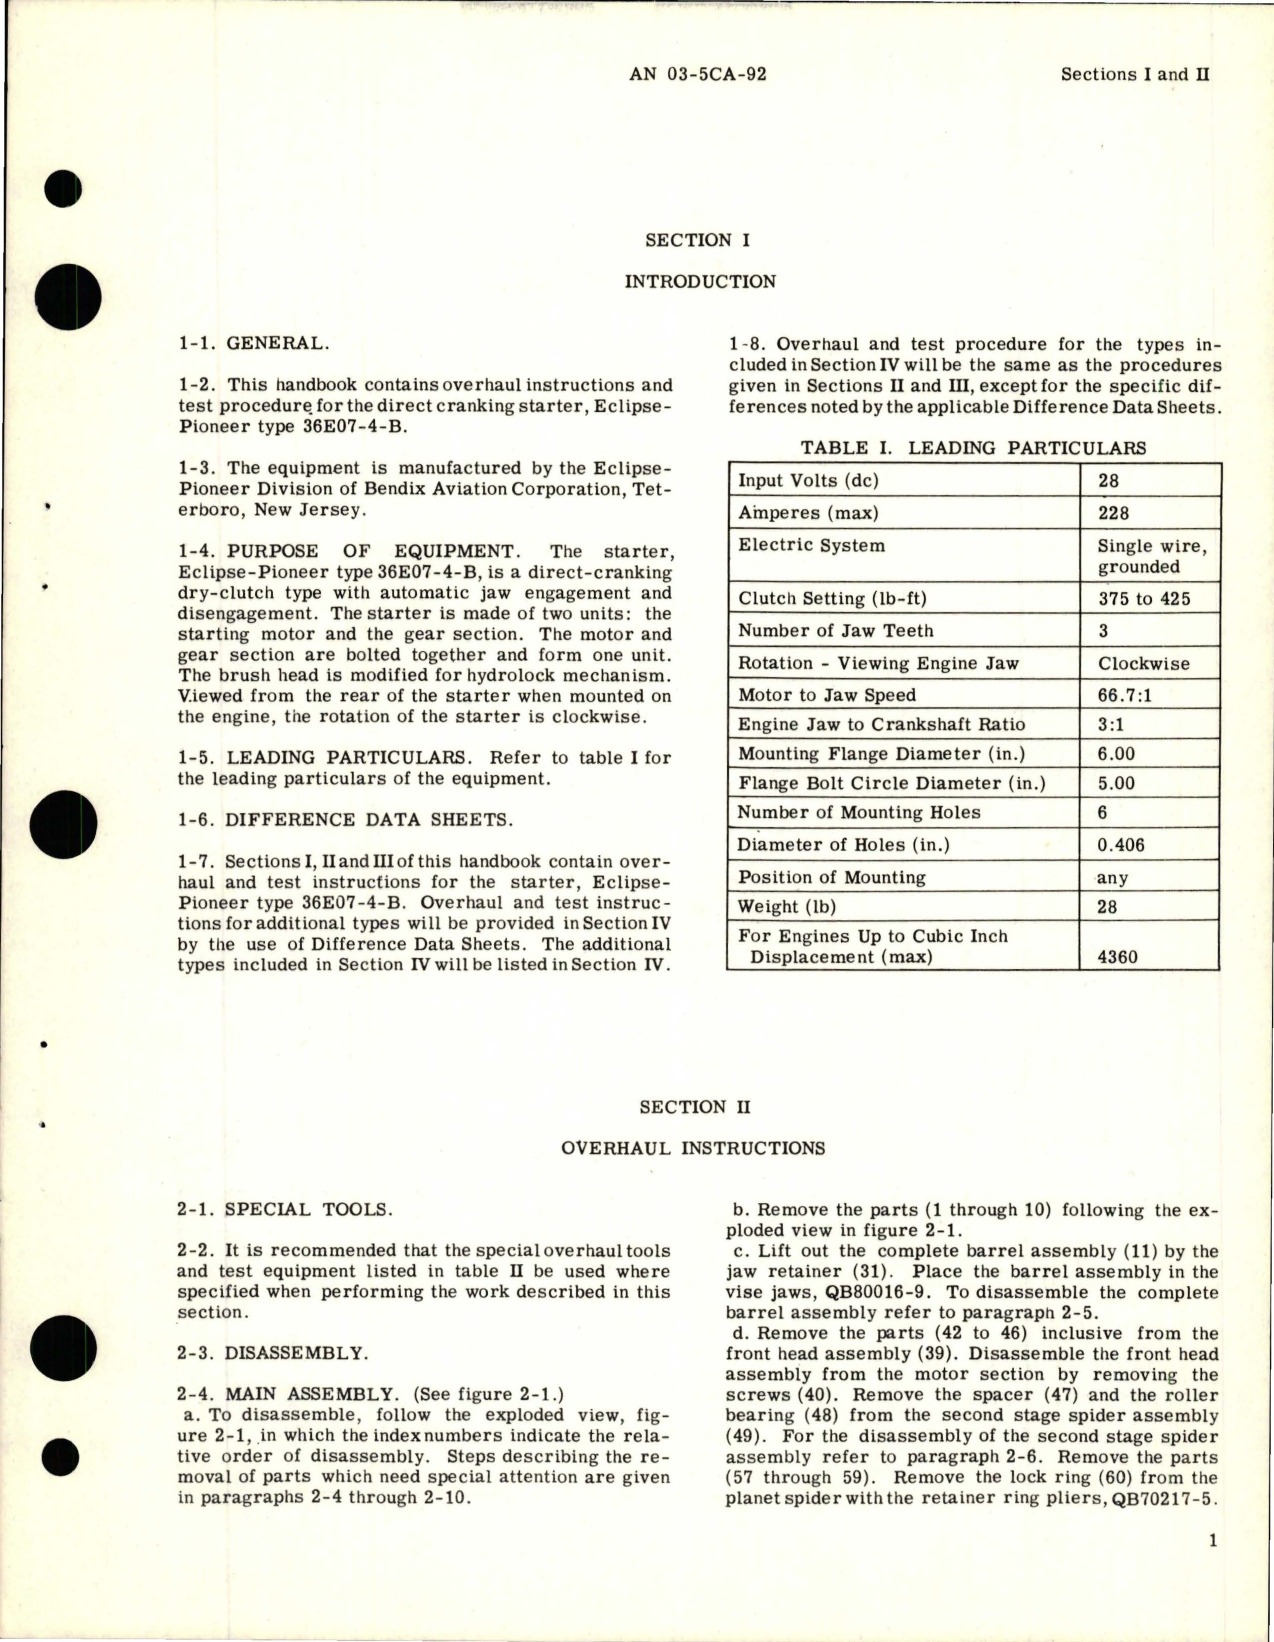 Sample page 5 from AirCorps Library document: Overhaul Instructions for Direct-Cranking Starter - Part 36E07-4-B